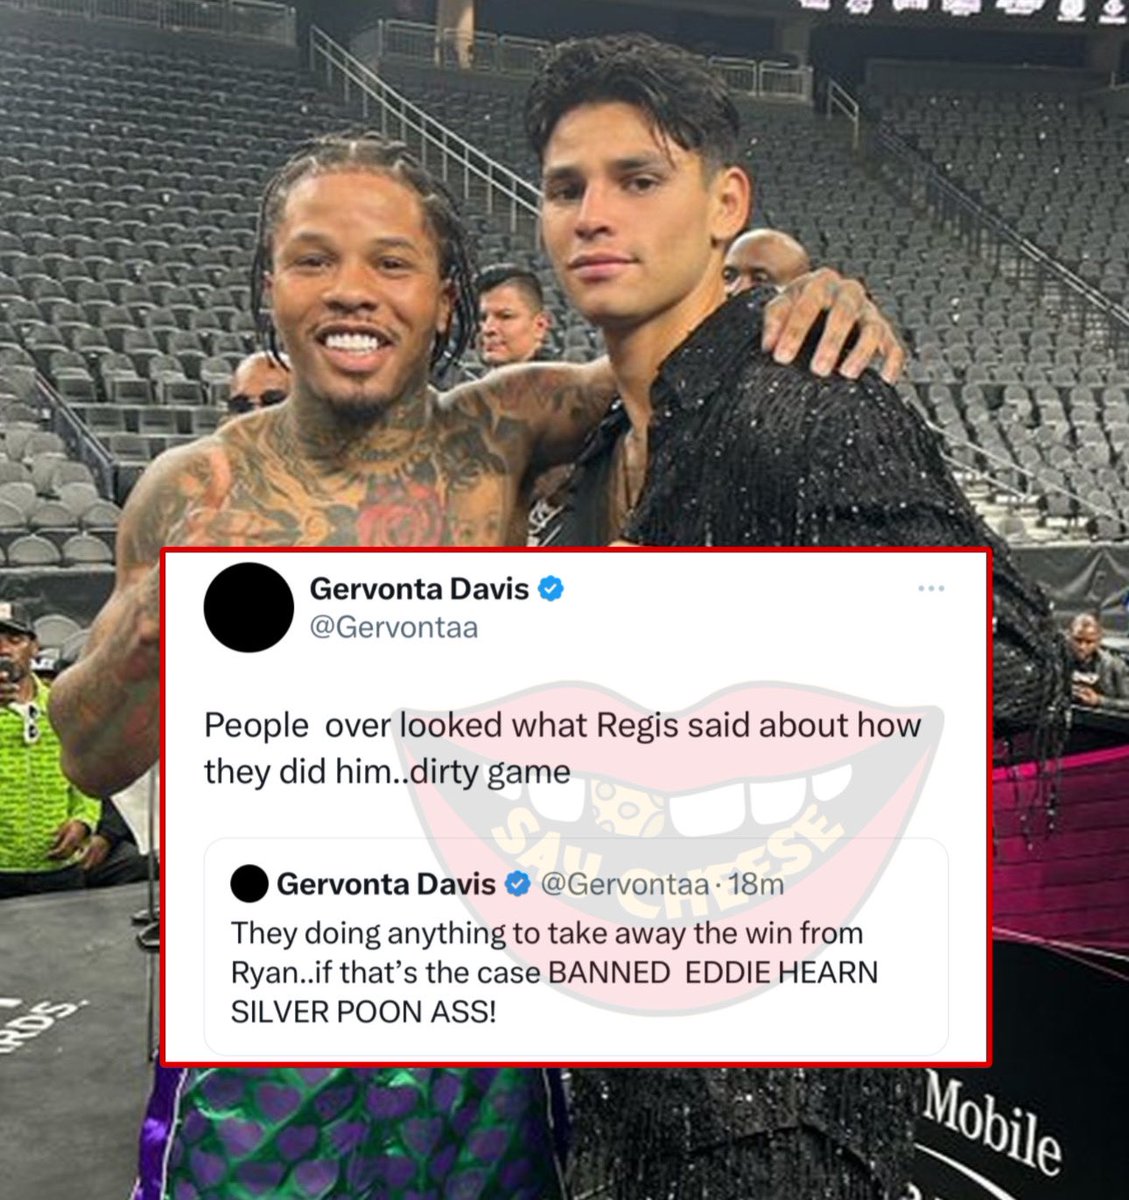 Gervonta Davis reacts to Ryan Garcia testing positive: “They doing anything to take away the win from Ryan”